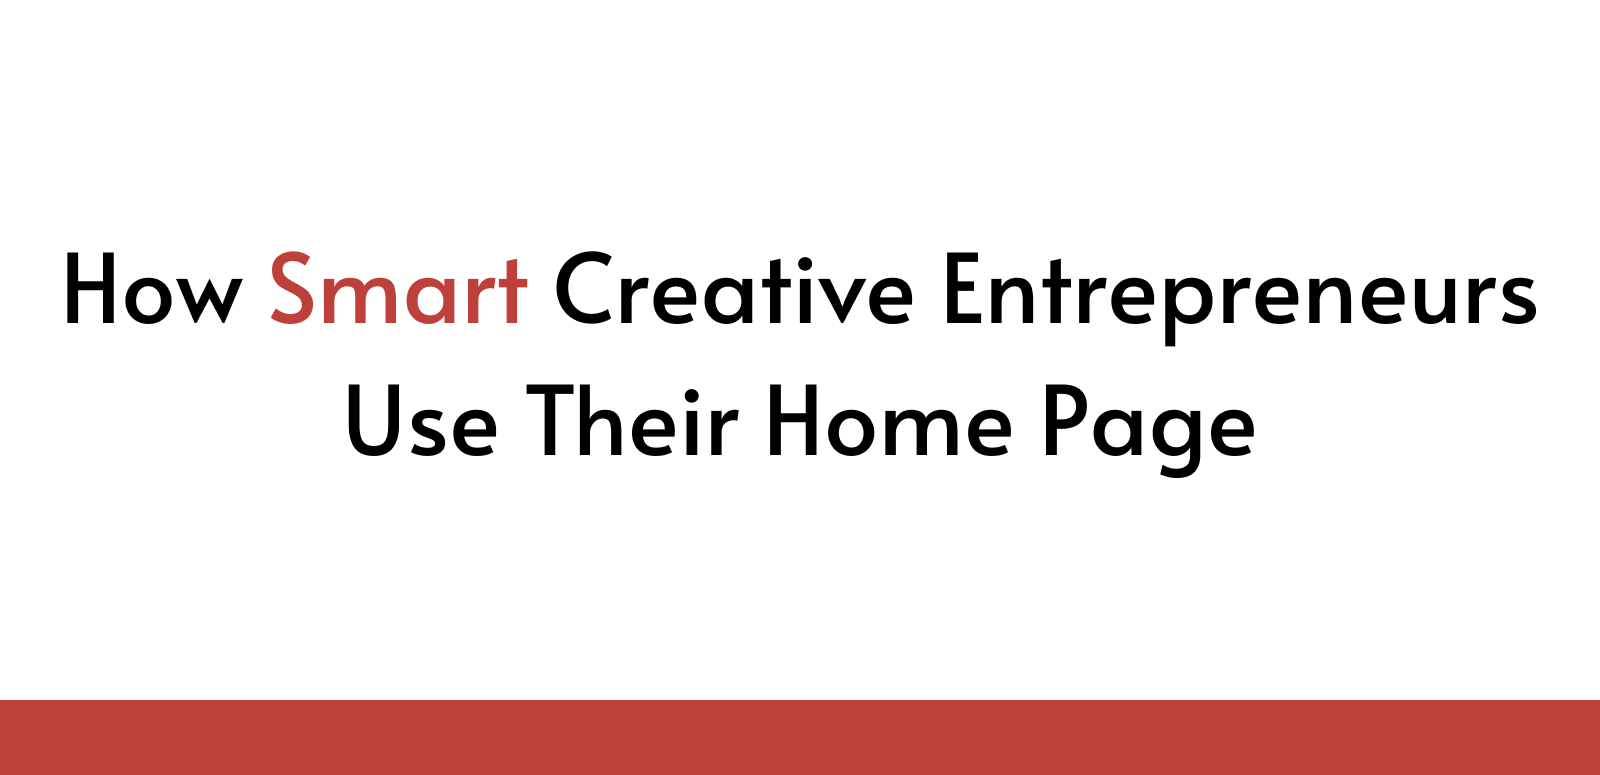 How Smart Creative Entrepreneurs Use Their Home Page